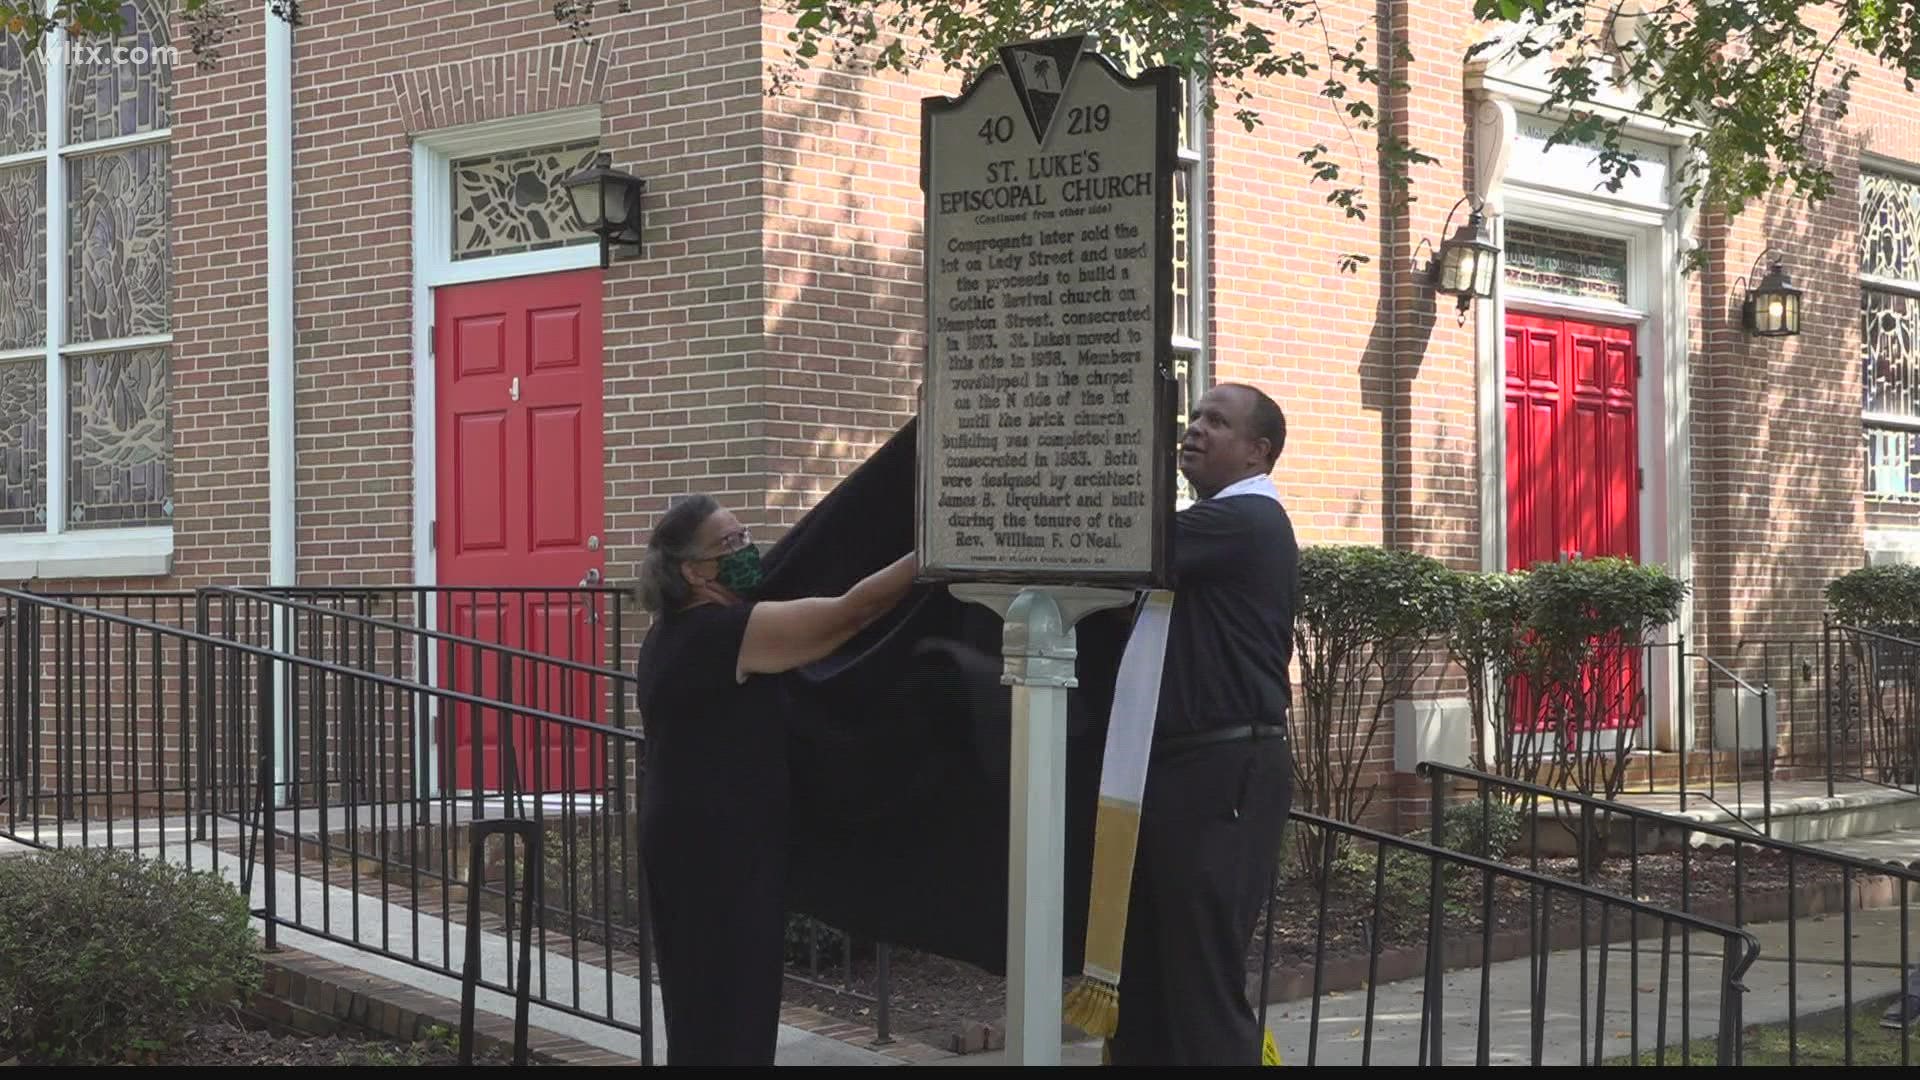 The historic church in the Waverly Community was the first Episcopal Church established for African-Americans in Columbia.,